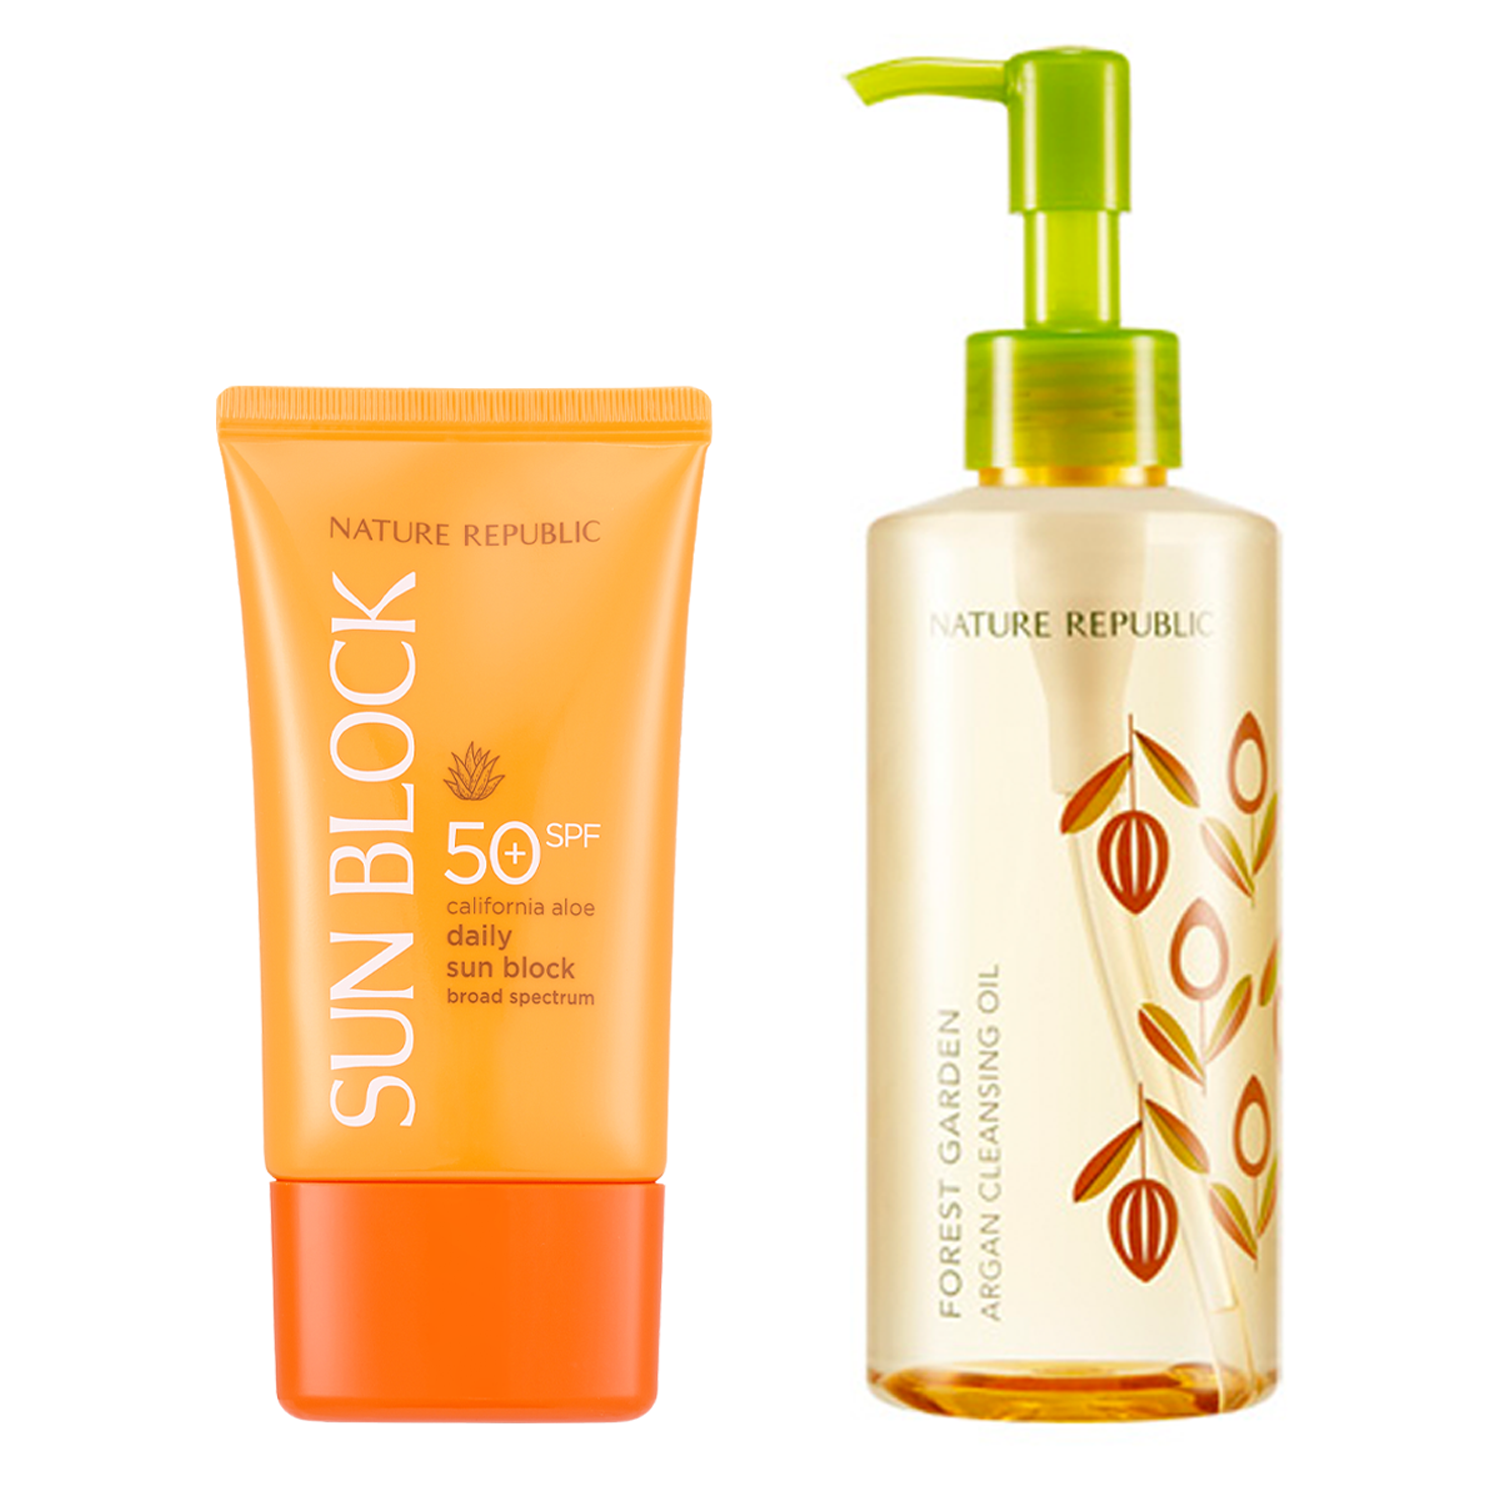 PERFECT SUN CARE & PERFECT CLEANSING - CALIFORNIA ALOE DAILY SUNBLOCK & FOREST GARDEN ARGAN CLEANSING OIL